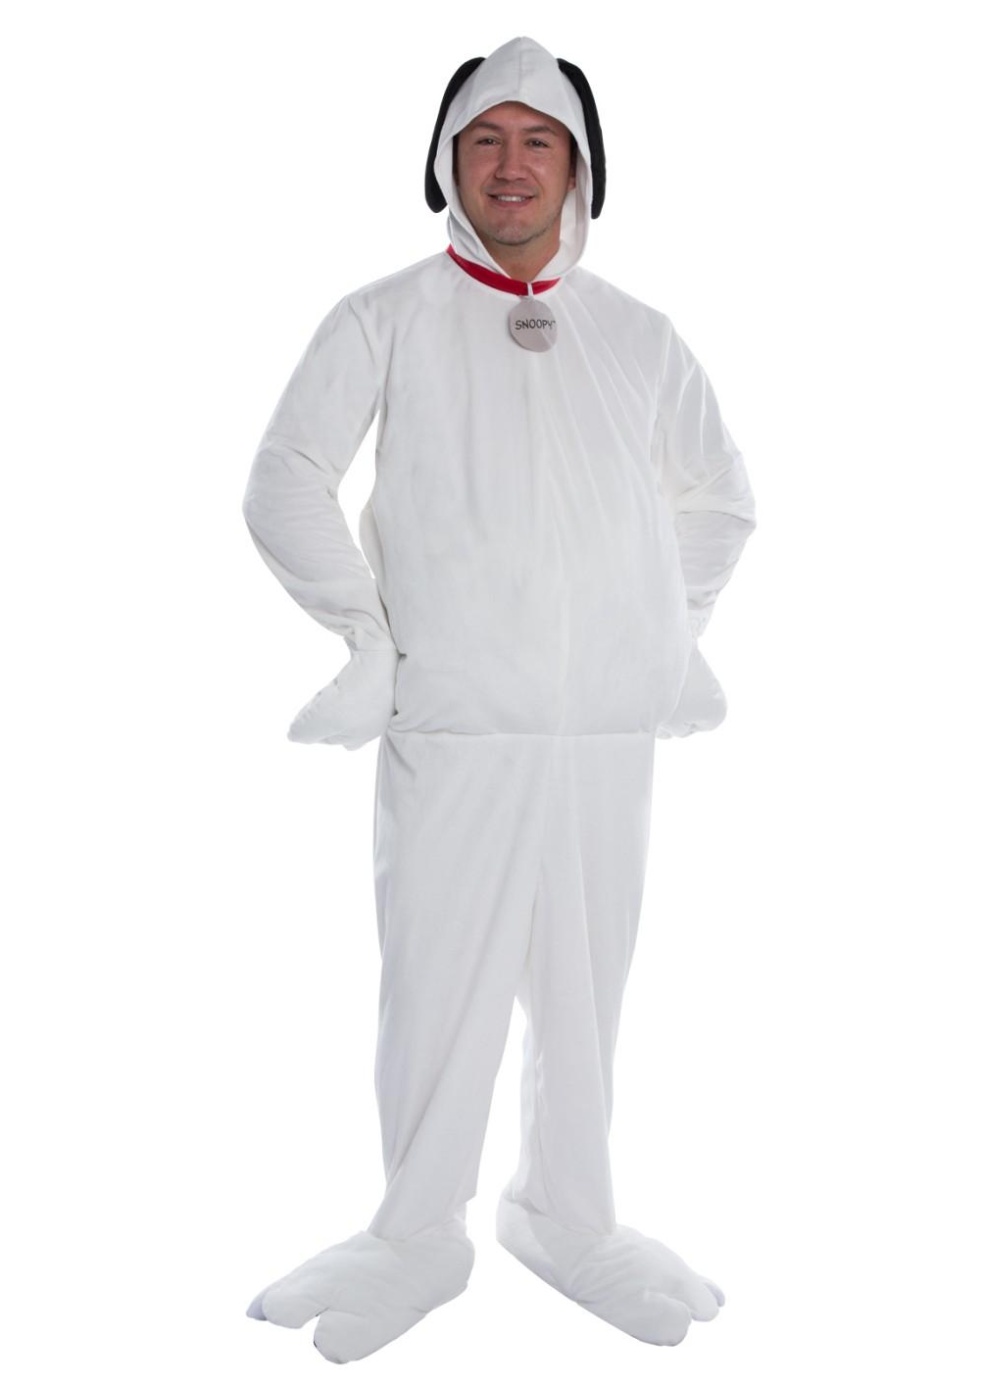 Peanuts Snoopy Mens Costume - TV Show Costumes